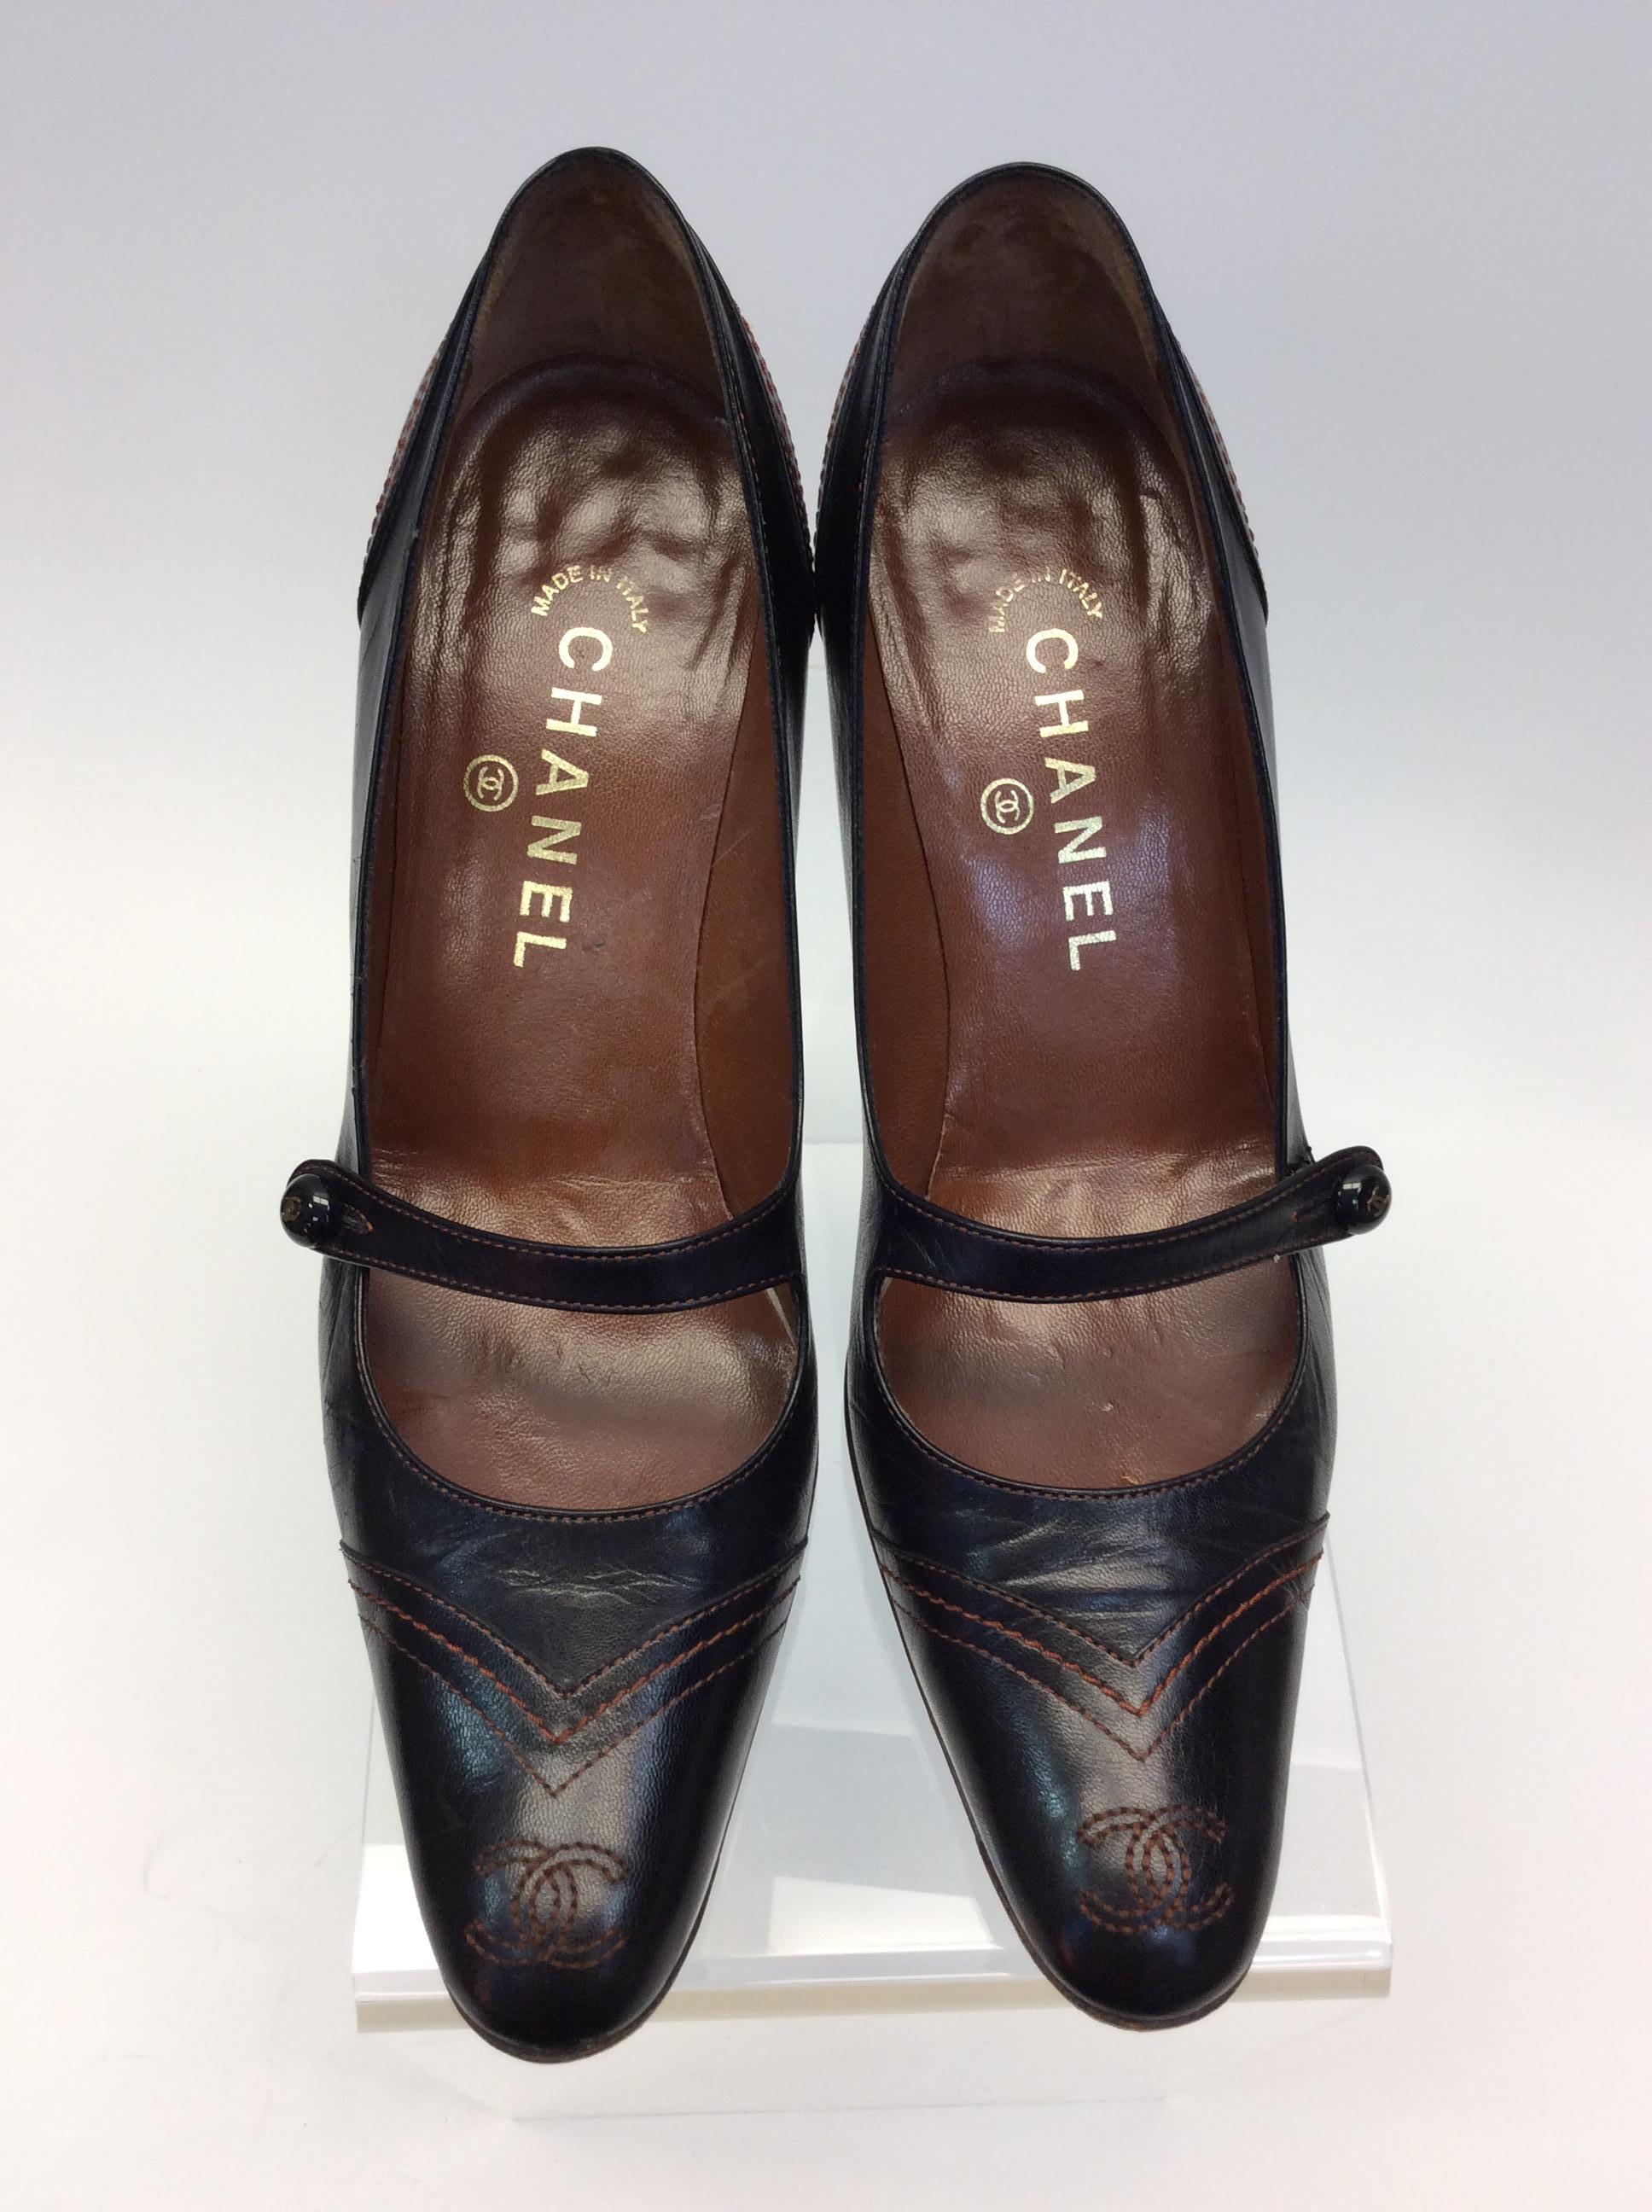 Chanel Black Leather Pump For Sale 1